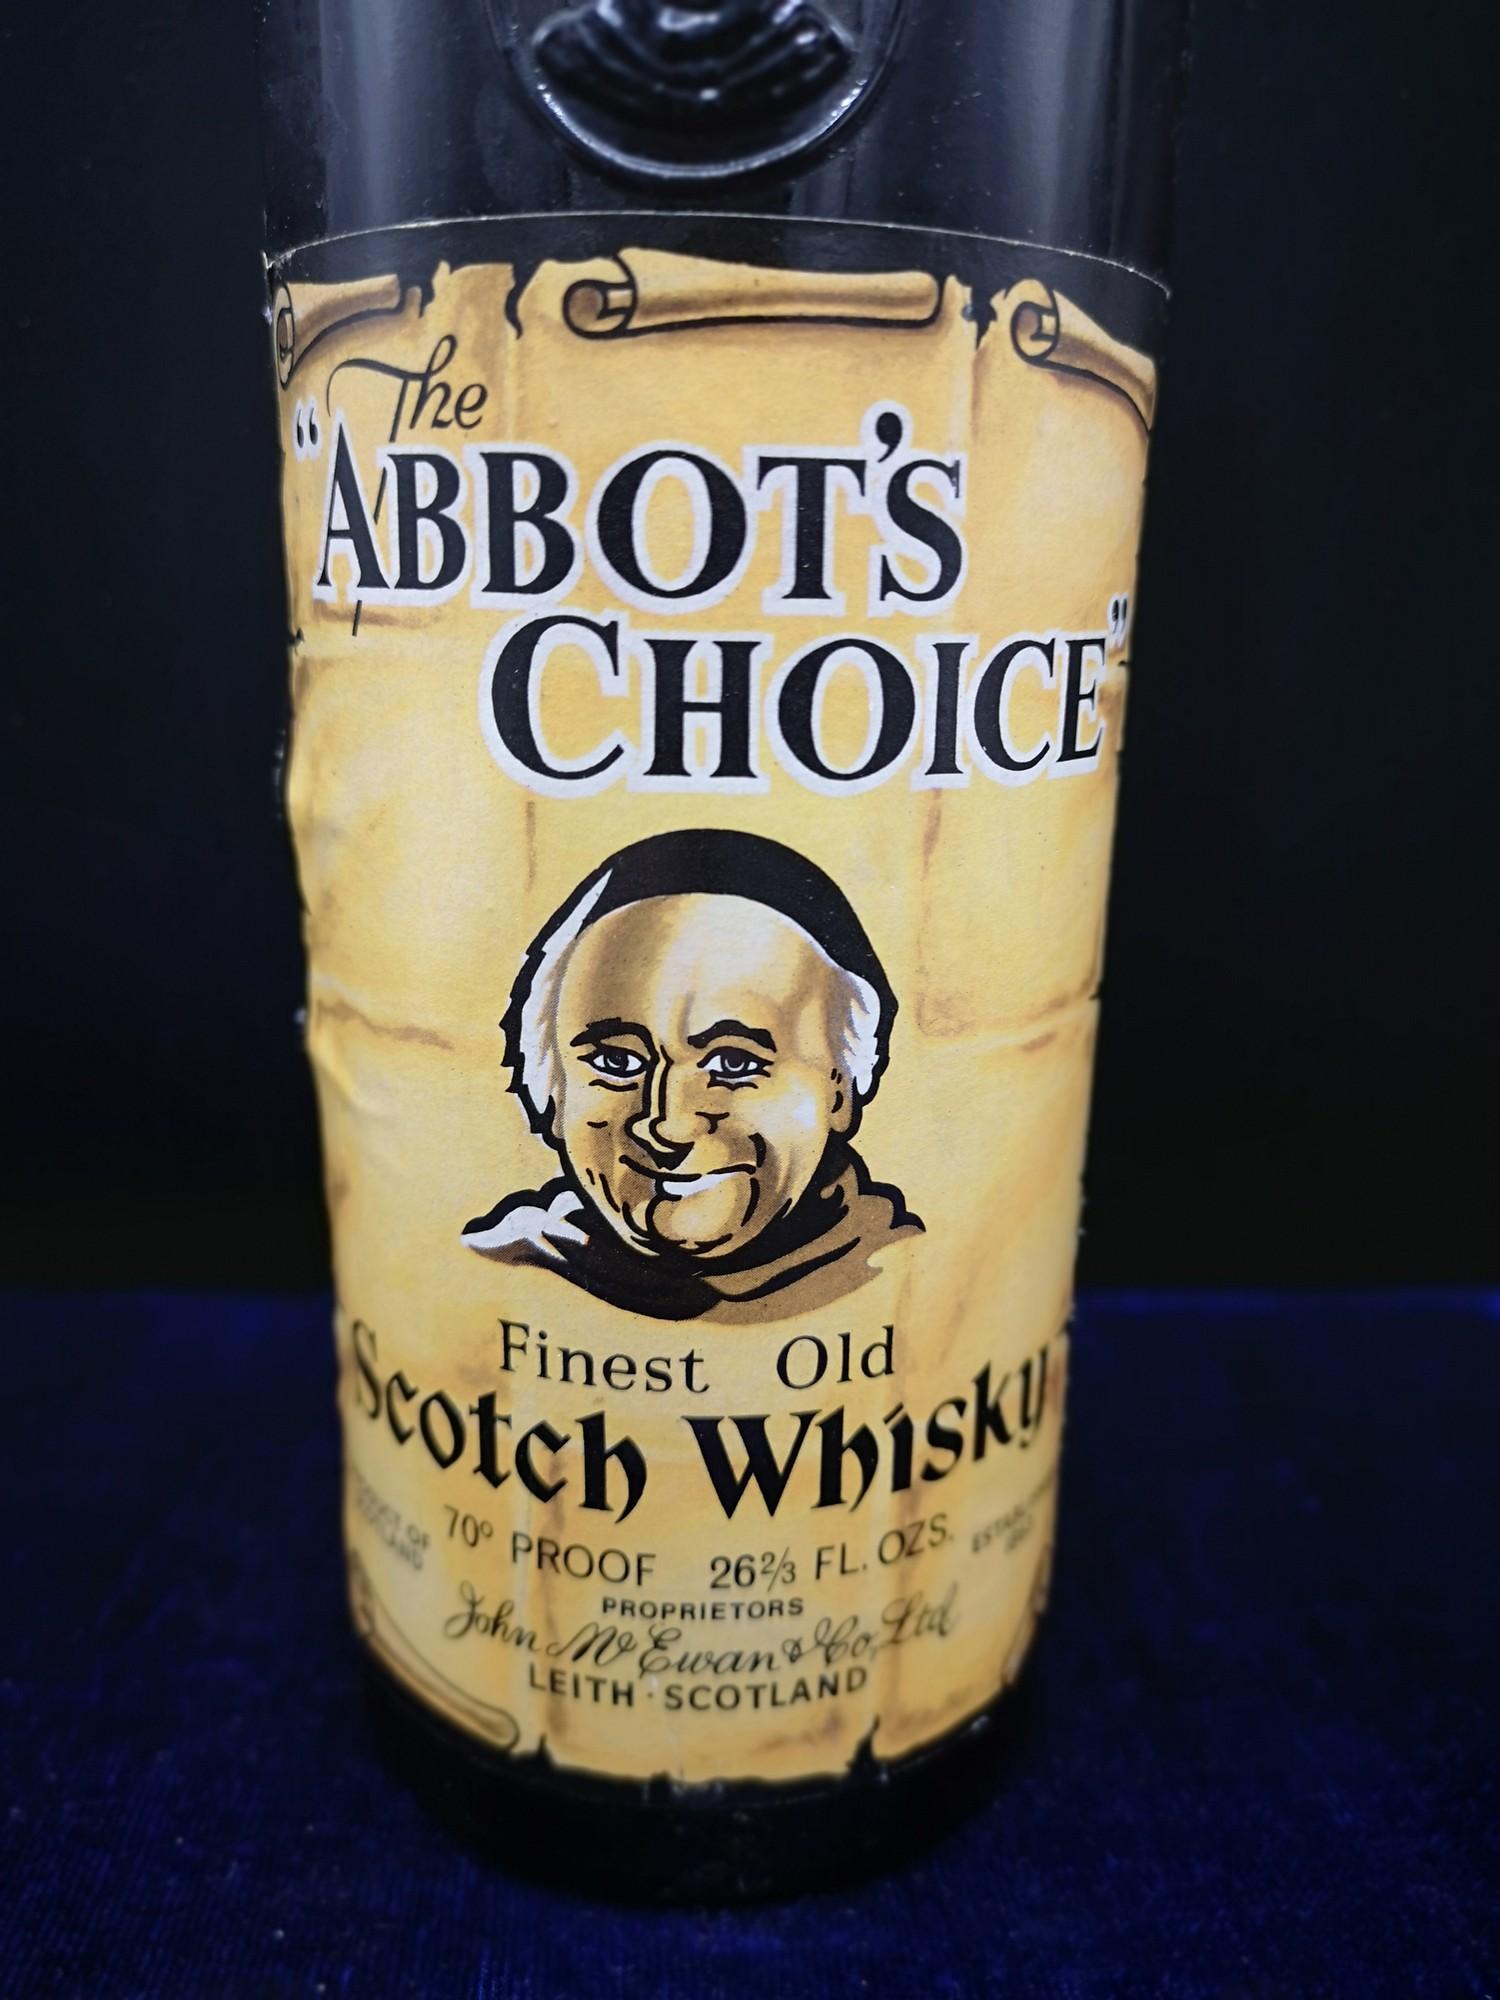 The abbot's choice finest old scotch whisky 70% proof, 26 2/3 fl ozs. Full and sealed. - Image 3 of 3